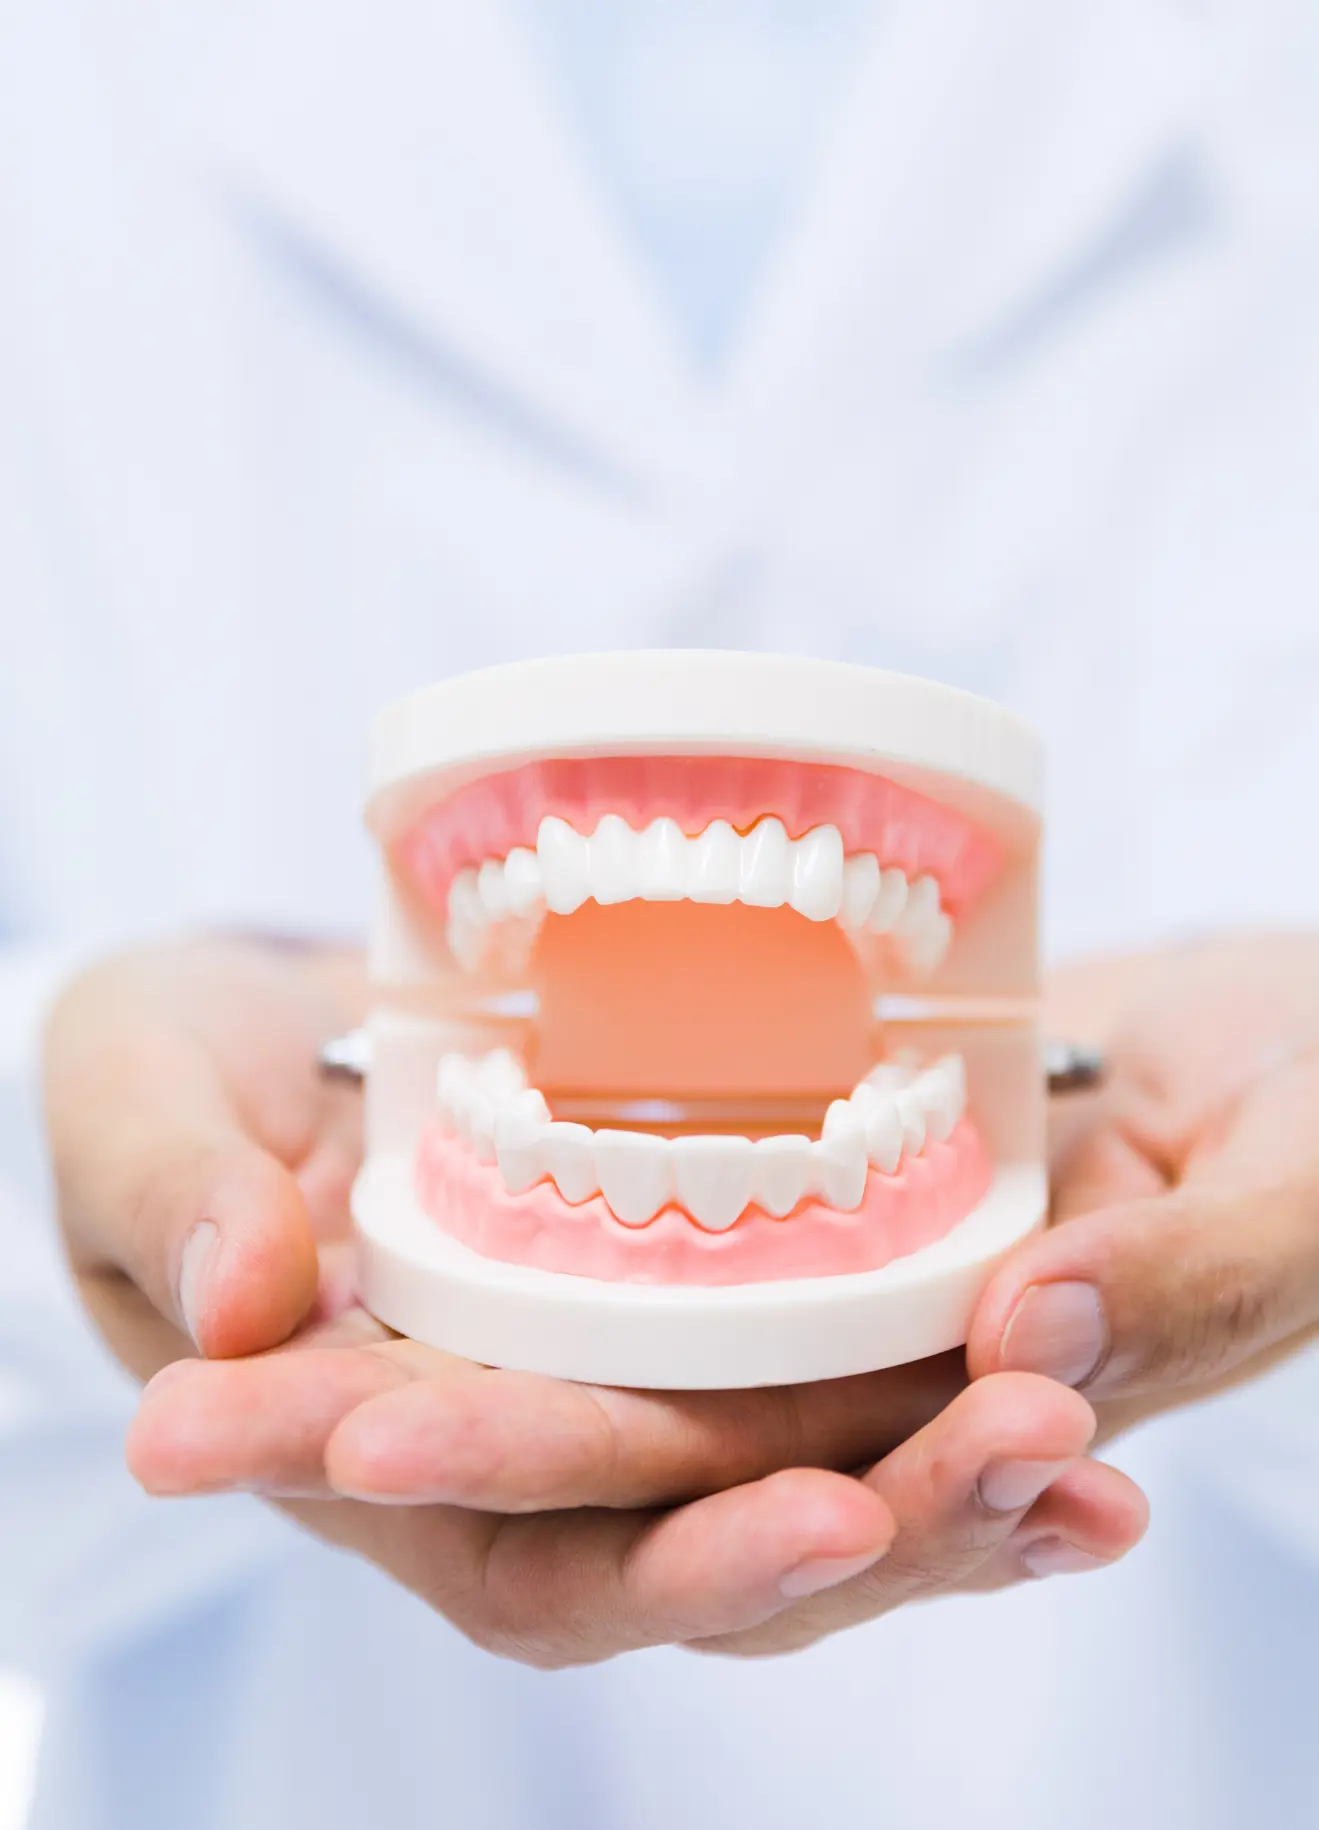 Bridges & Dentures Treatment by Garden Valley Family & Cosmetic Dentistry